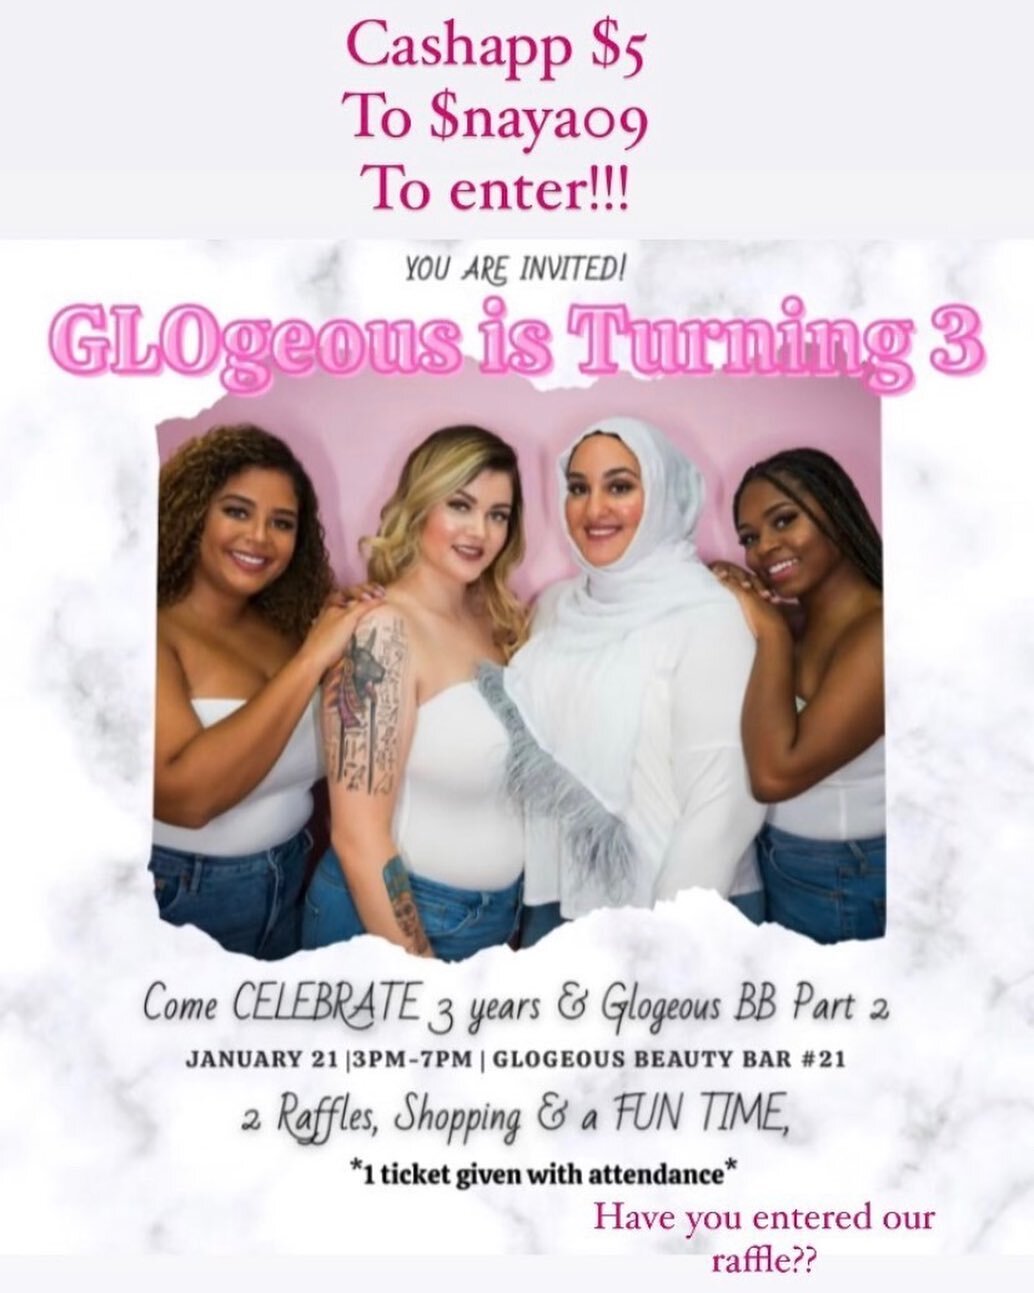 Have you entered our raffle?!?! 

There are two raffles!! 

1 ticket given with attendance to GLOgeous&rsquo; 3rd birthday party tomorrow for a chance to win:
Sugar wax - Brazilian /Full Bikini OR Classic FACIAL!!!! 

Come hang from 4-7 pm! 
 
The se